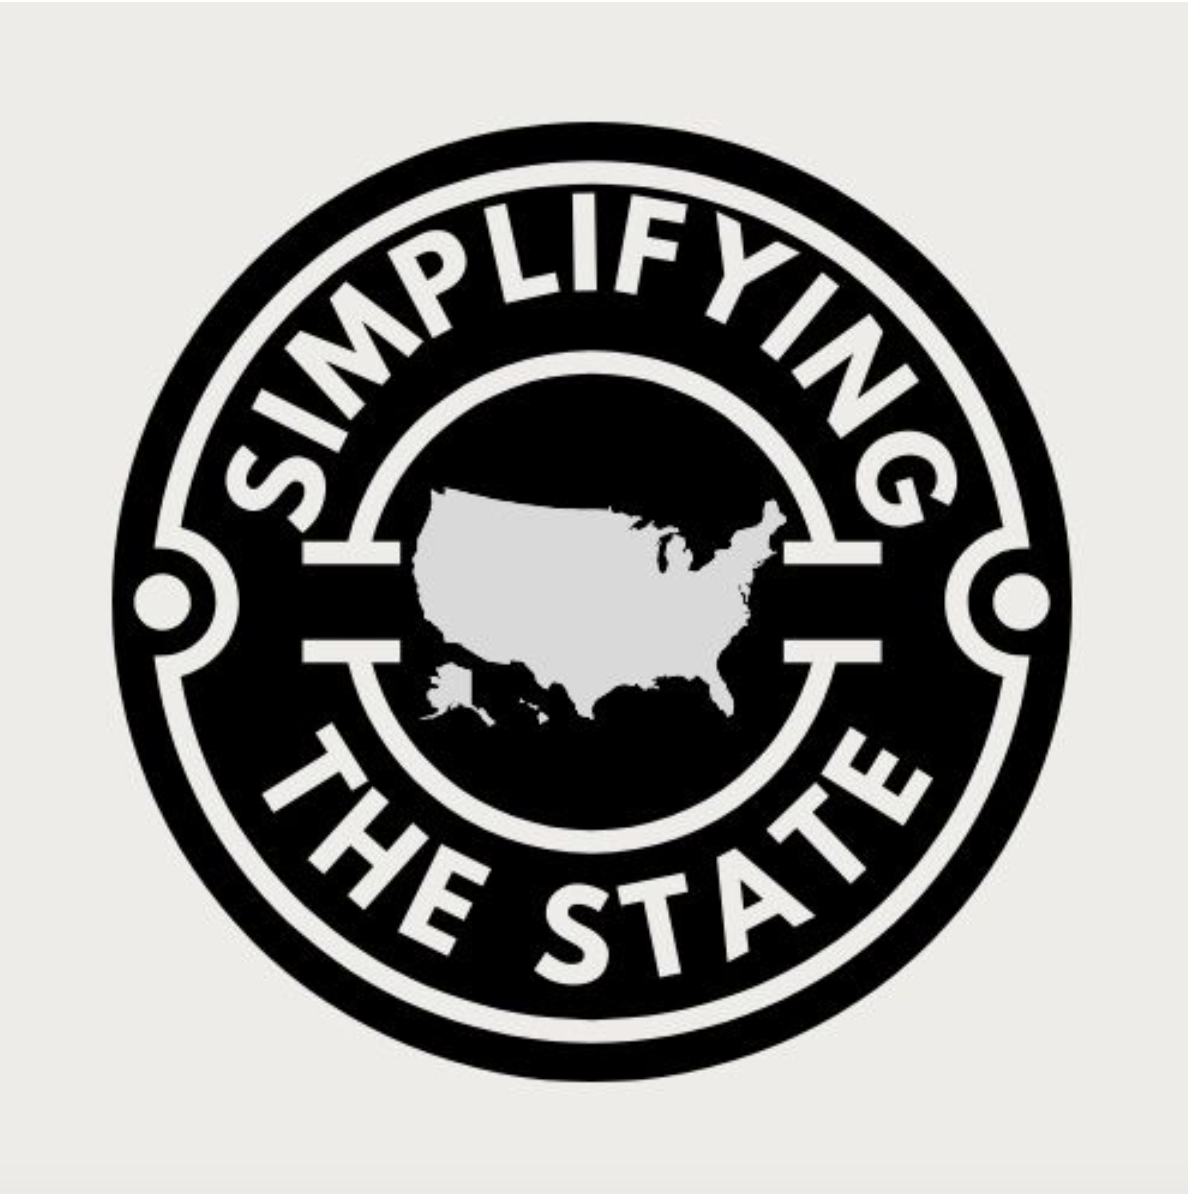 Simplifying+The+State+Ep+3